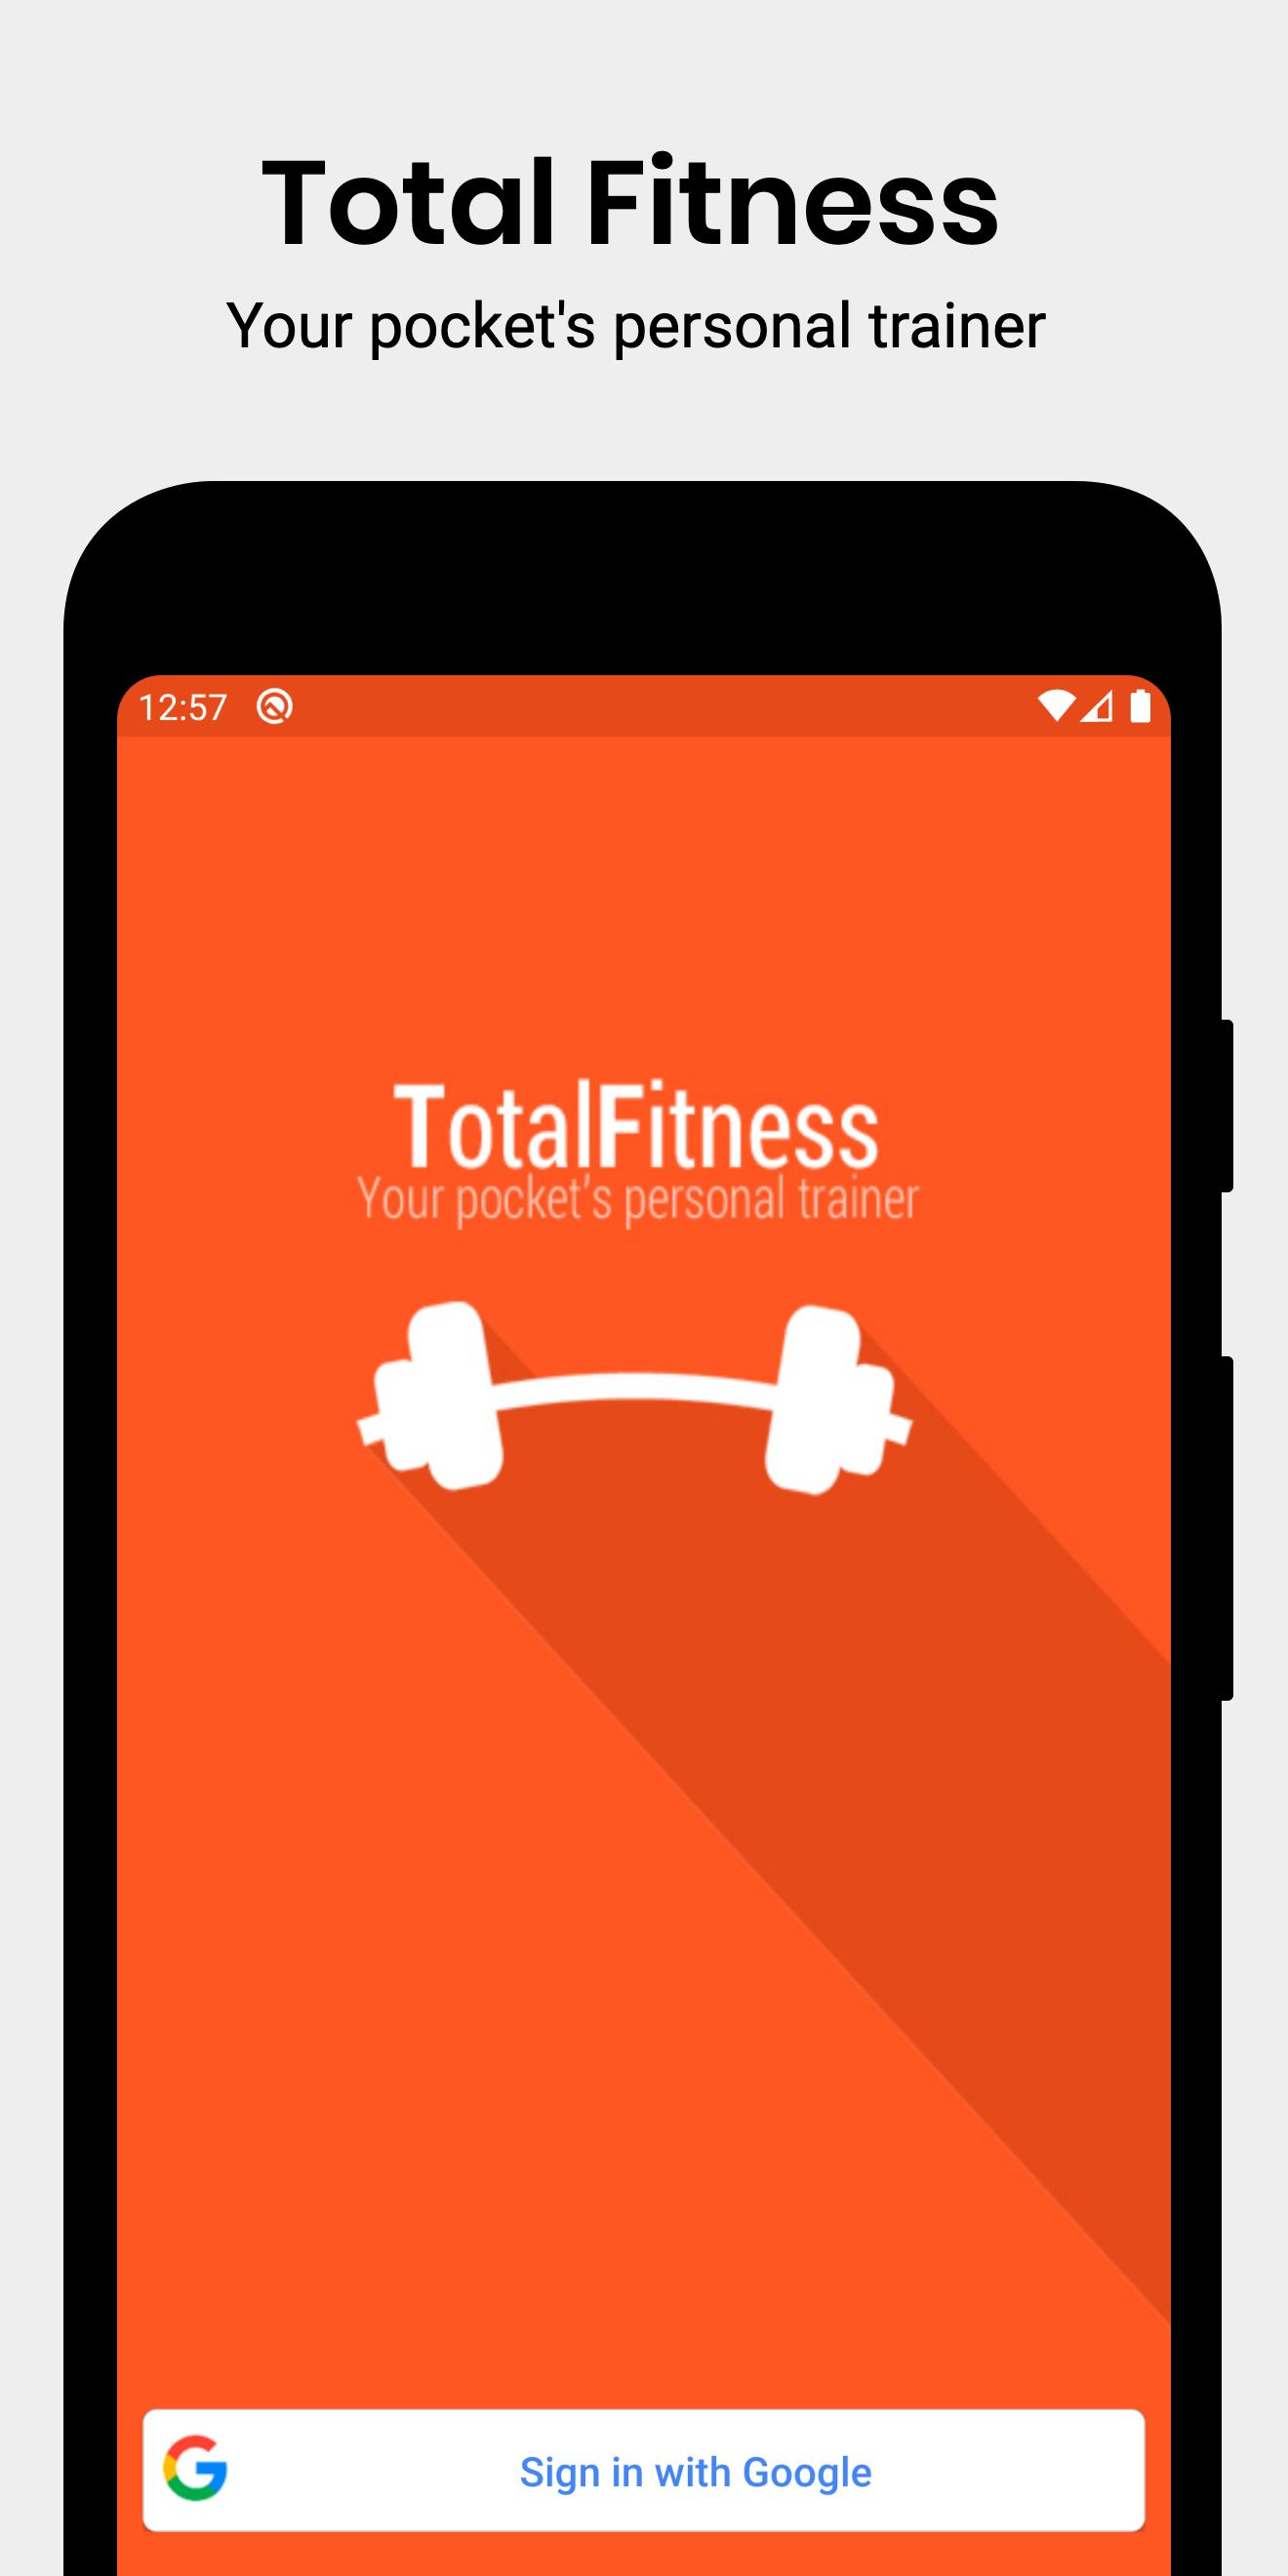 30 Minute Total fitness gym workout pro apk for Women